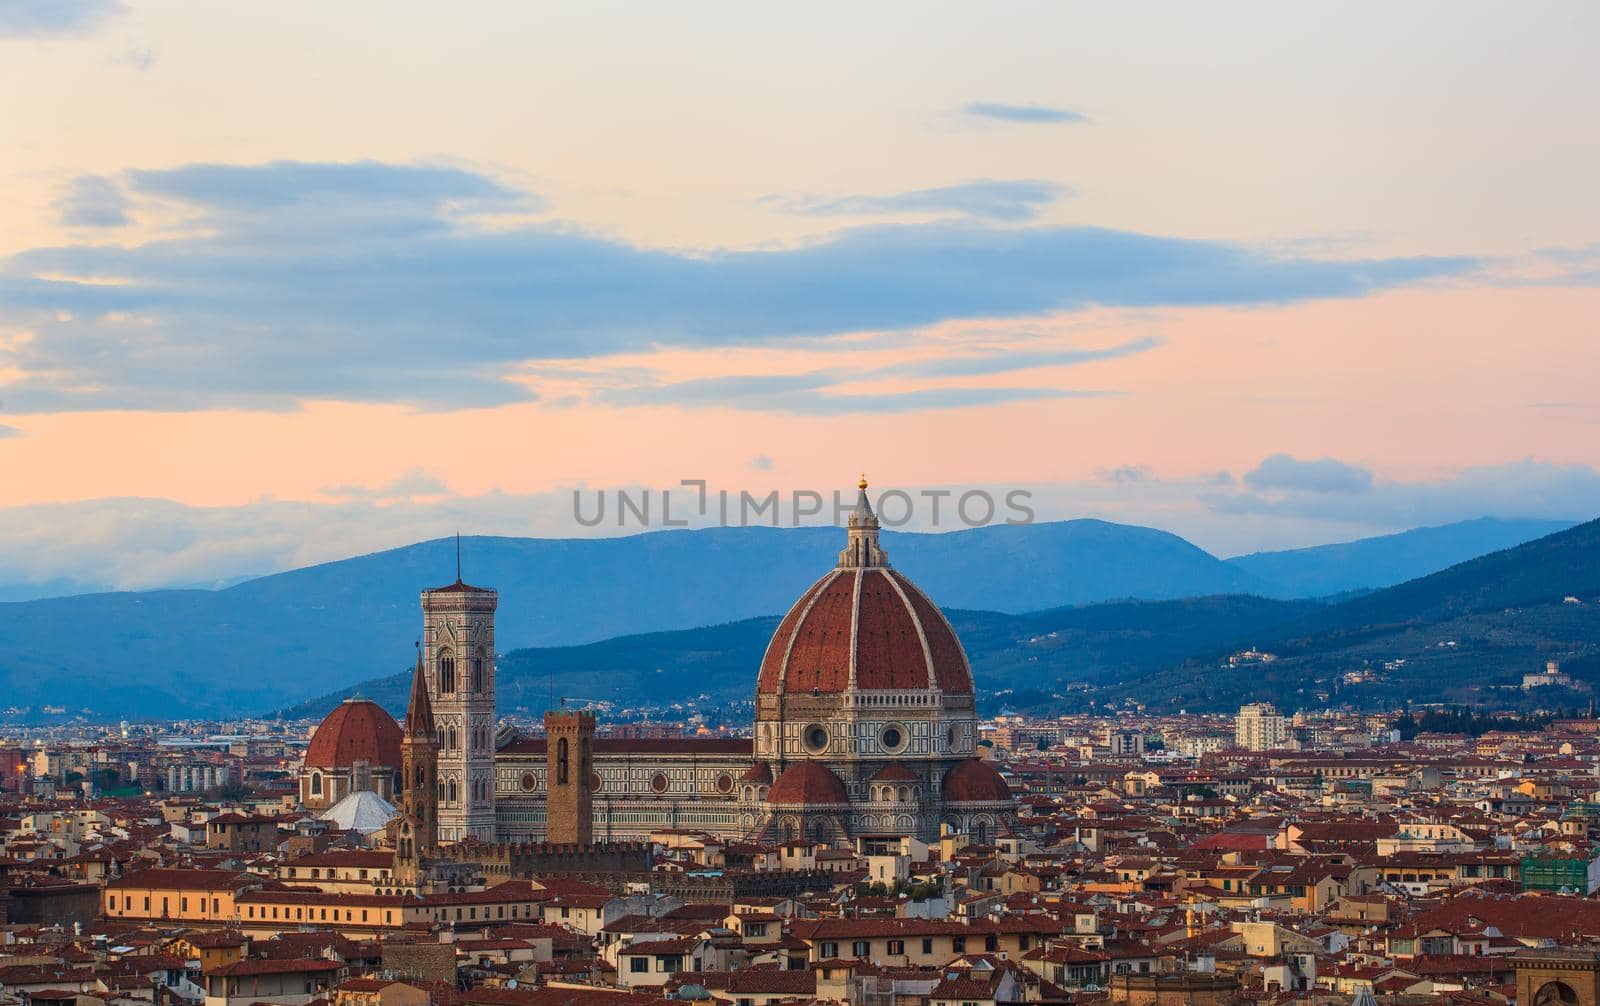 View of the Cathedral of Saint Mary of the Flower - Cattedrale di Santa Maria del Fiore in Florence, tuscany. Italy